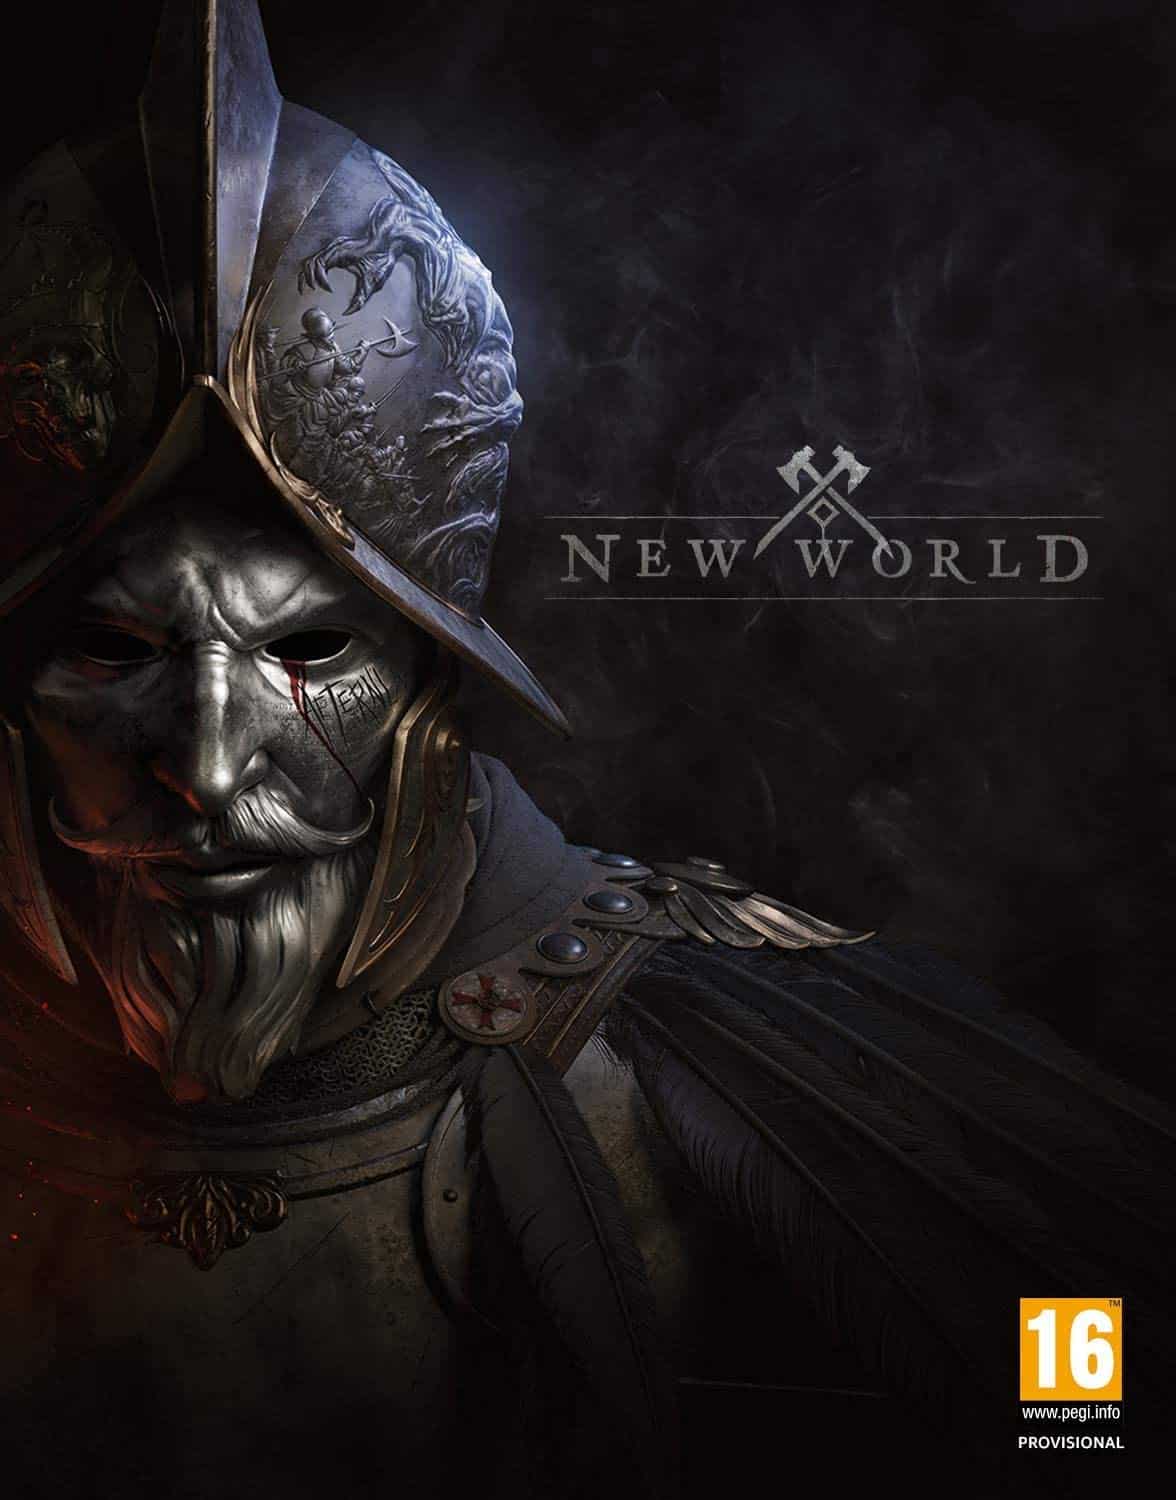 new world release date